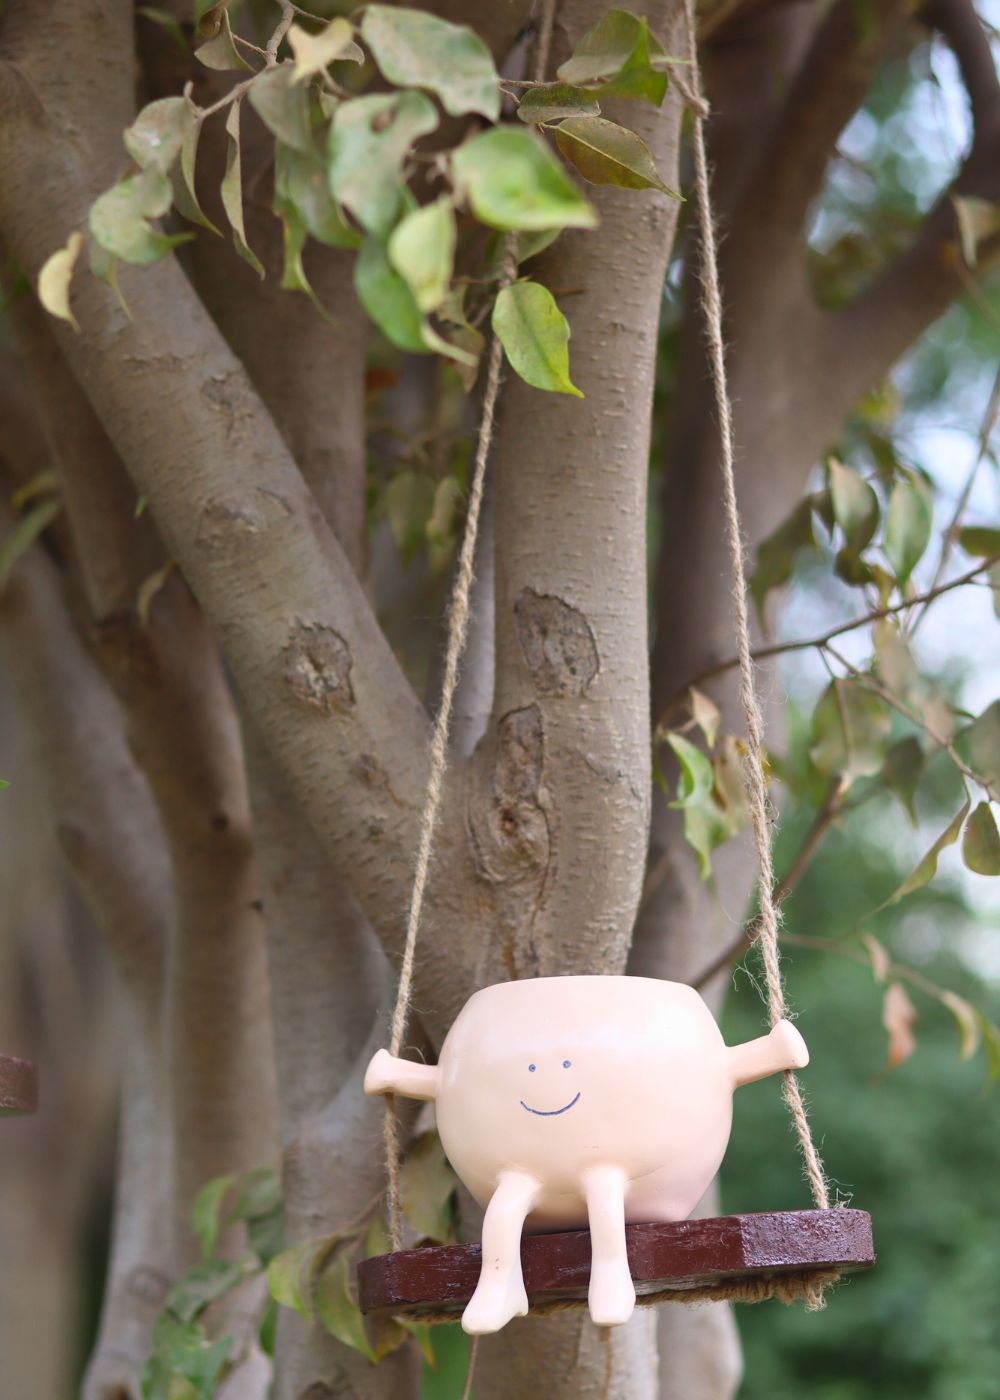 smiley hanging planter handmade in india